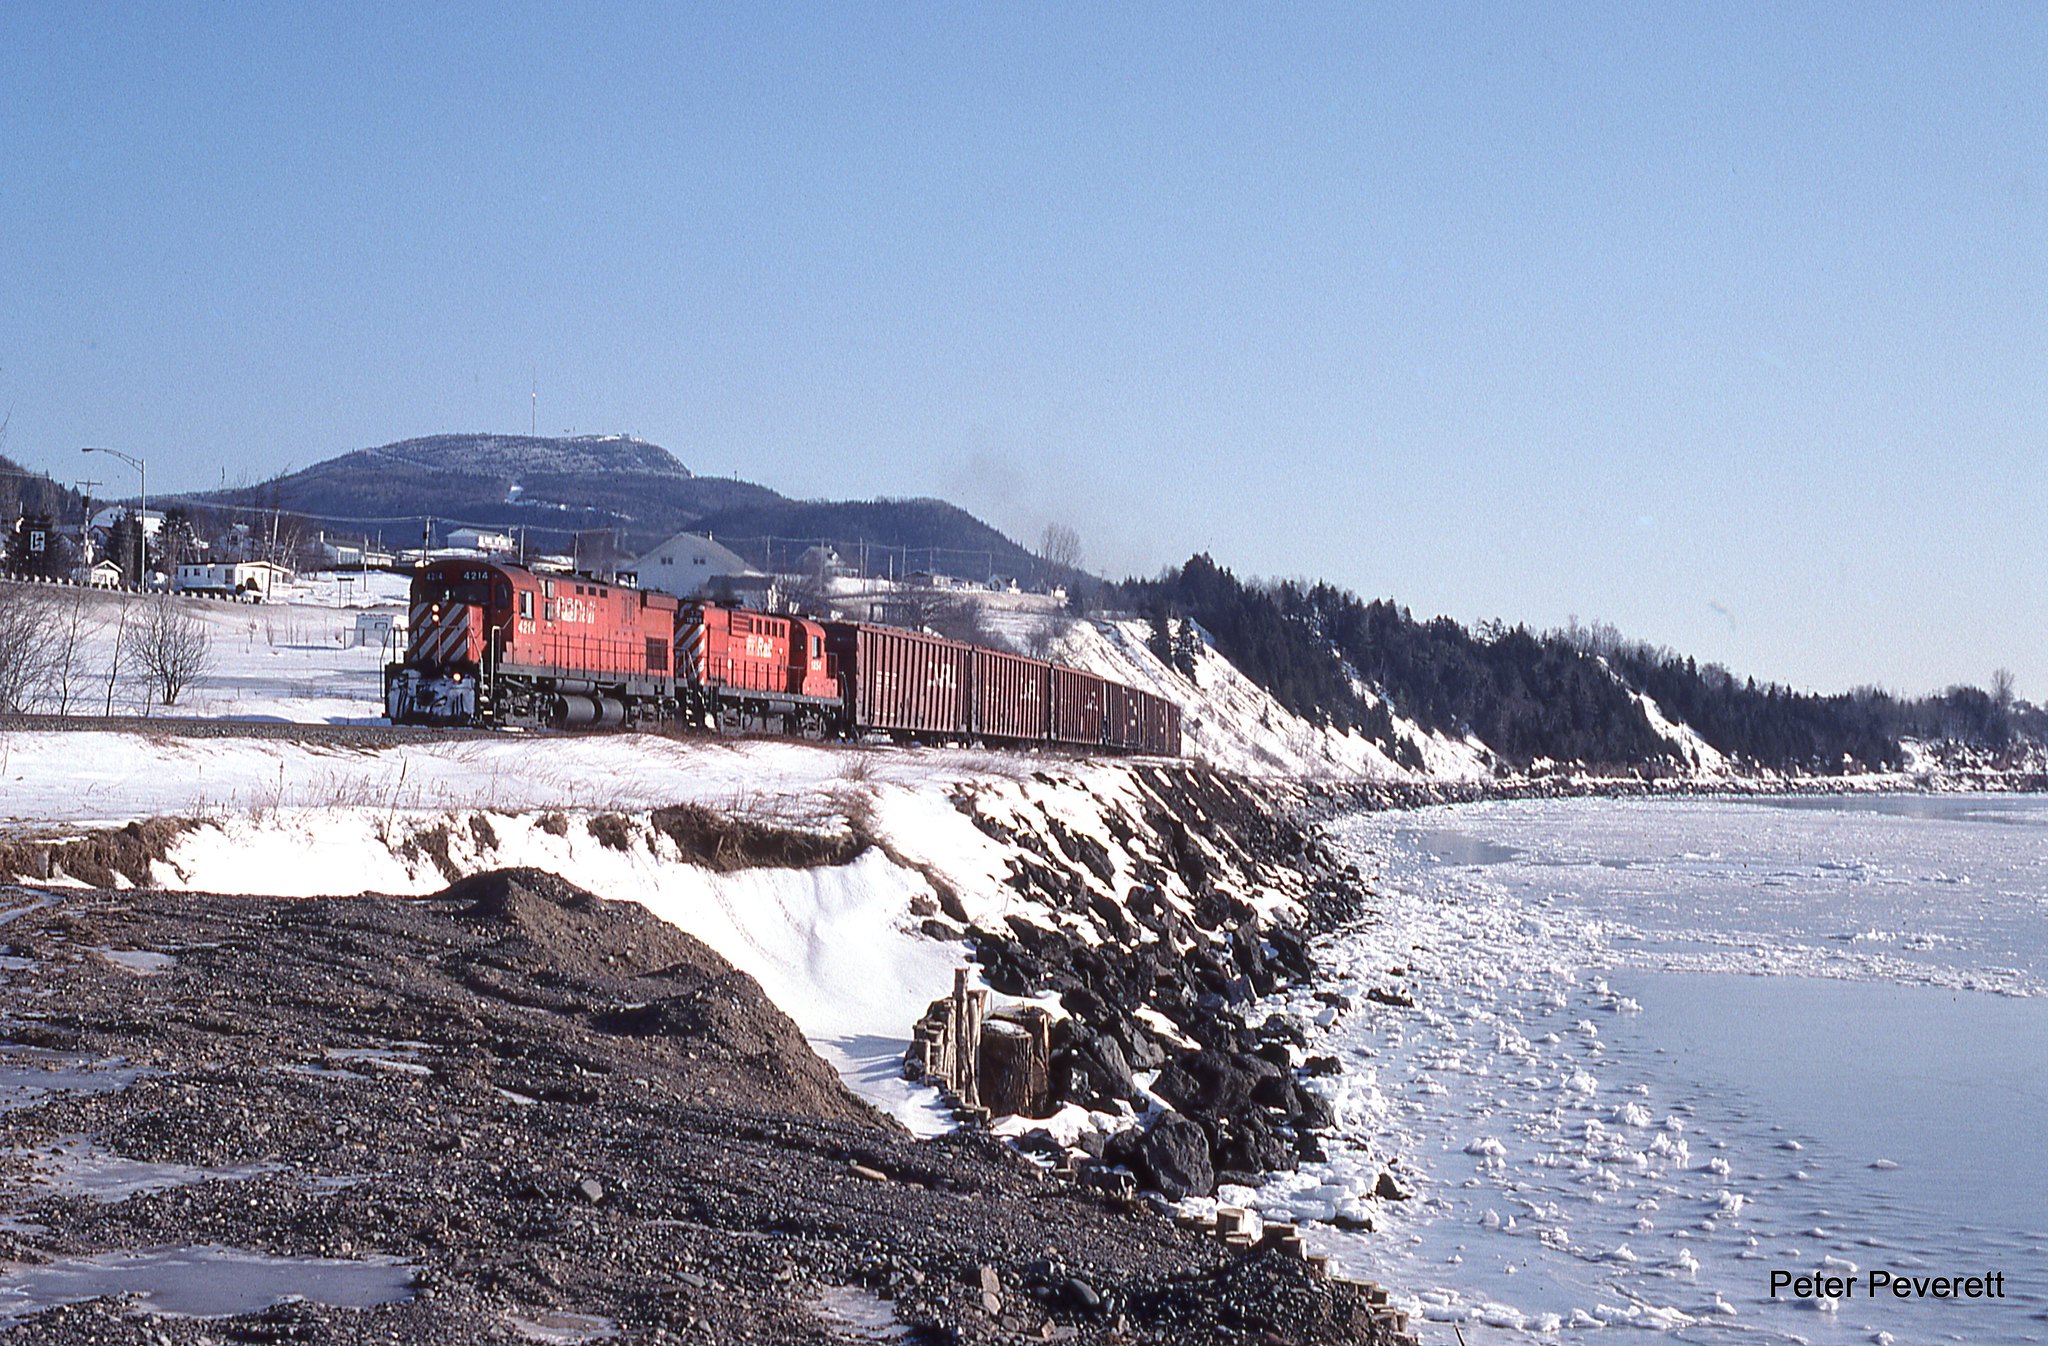 New Brunswick East Coast Train 595 with C-424 # 4214, RS-18 # 1854 run alongside Chaleur Bay at Carleton, Quebec Feb. 10, 2006. The train is back hauling wood chips from the closed New Richmond mill.